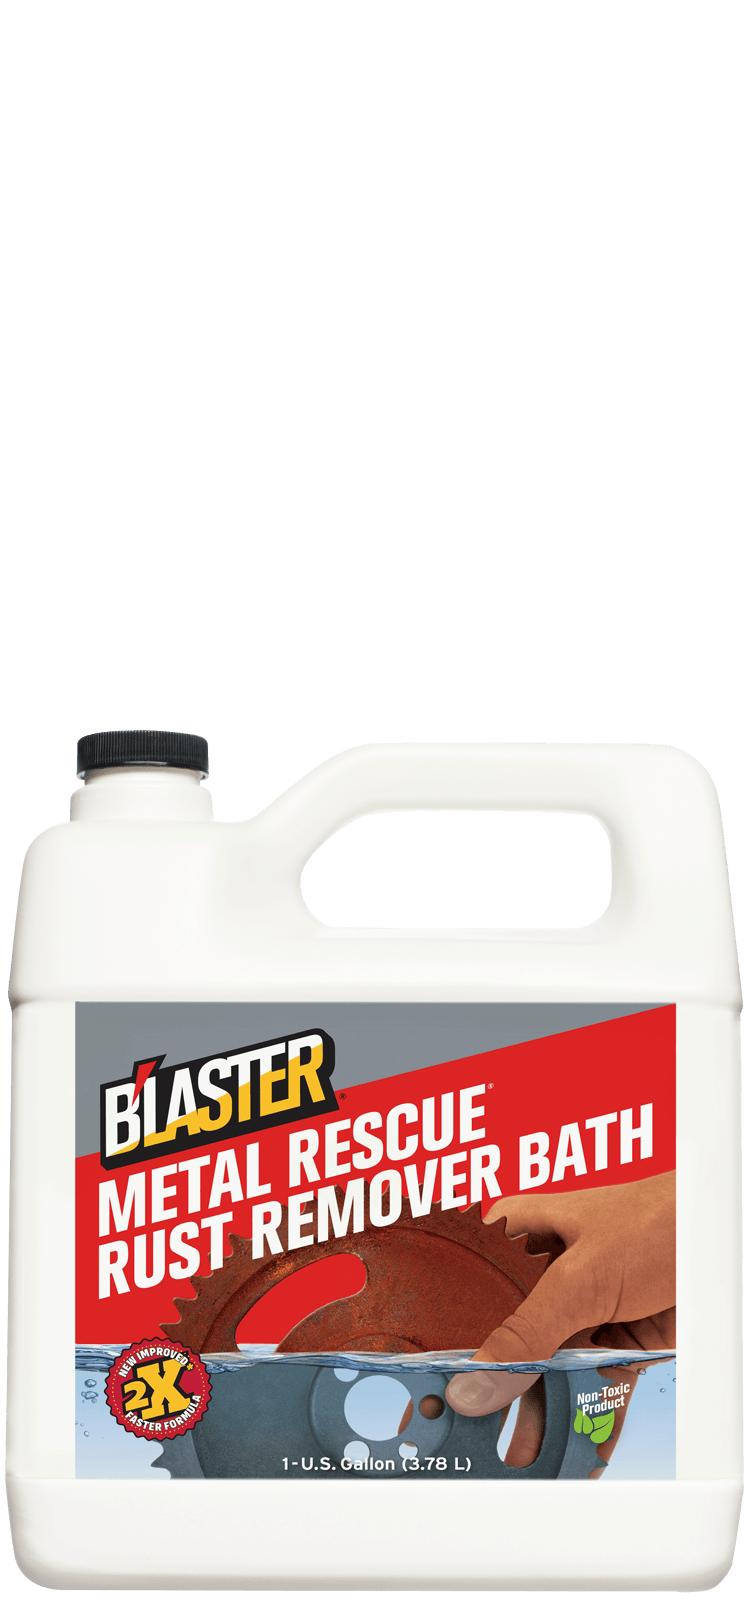 https://blasterproducts.com/wp-content/uploads/2020/11/128-MR_product_image.png